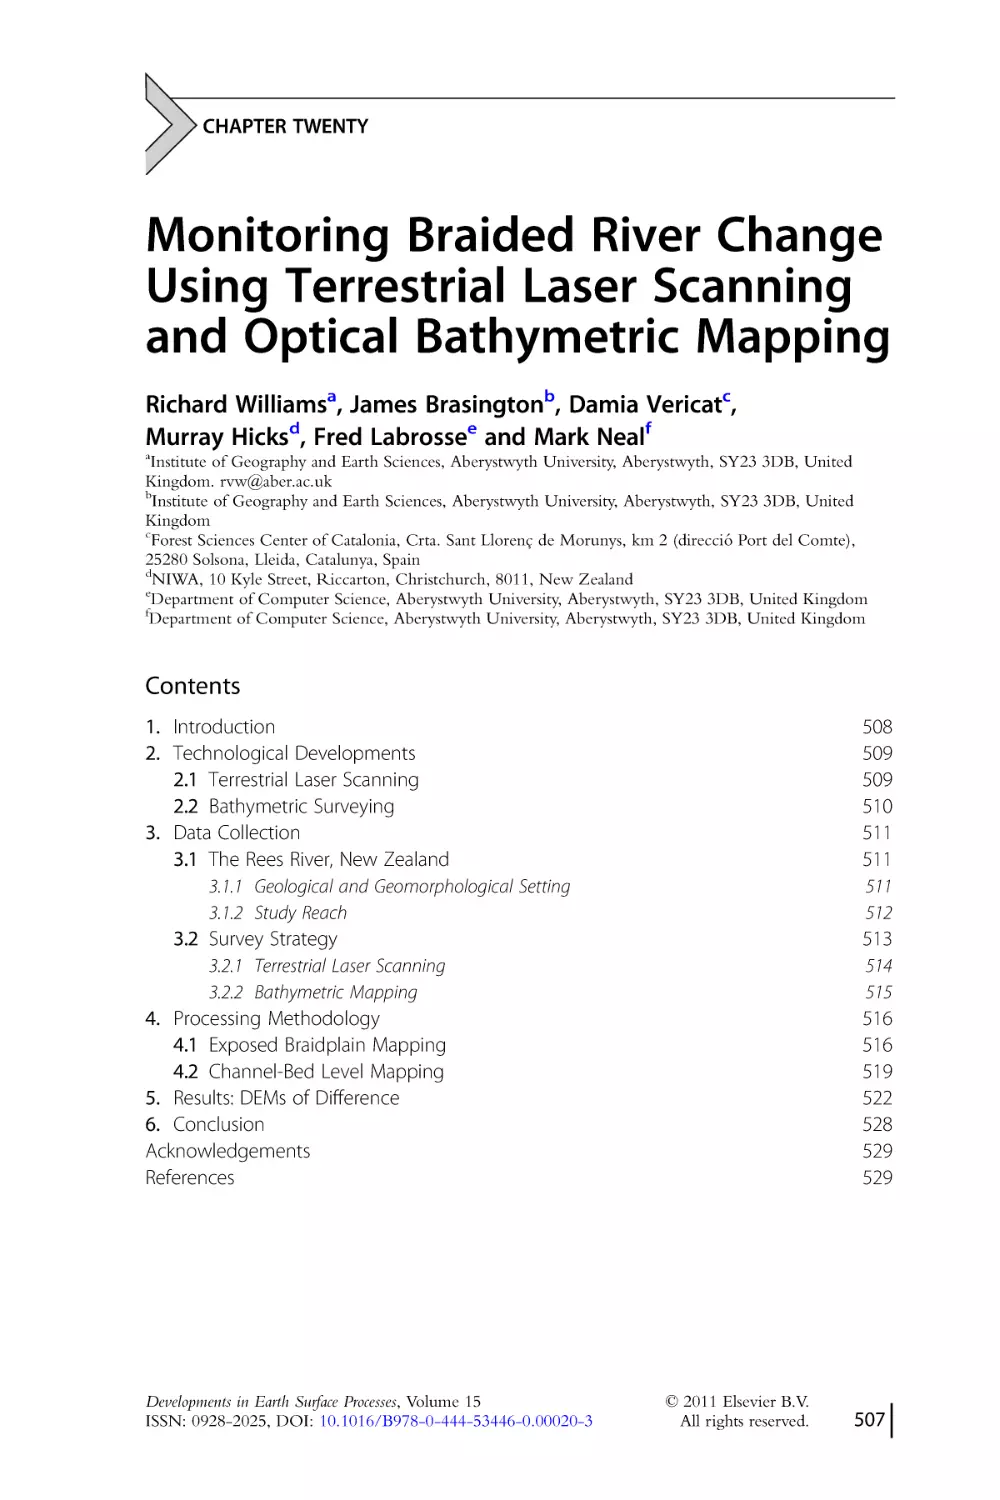 CHAPTER TWENTY.
Monitoring Braided River Change
Using Terrestrial Laser Scanning
and Optical Bathymetric Mapping